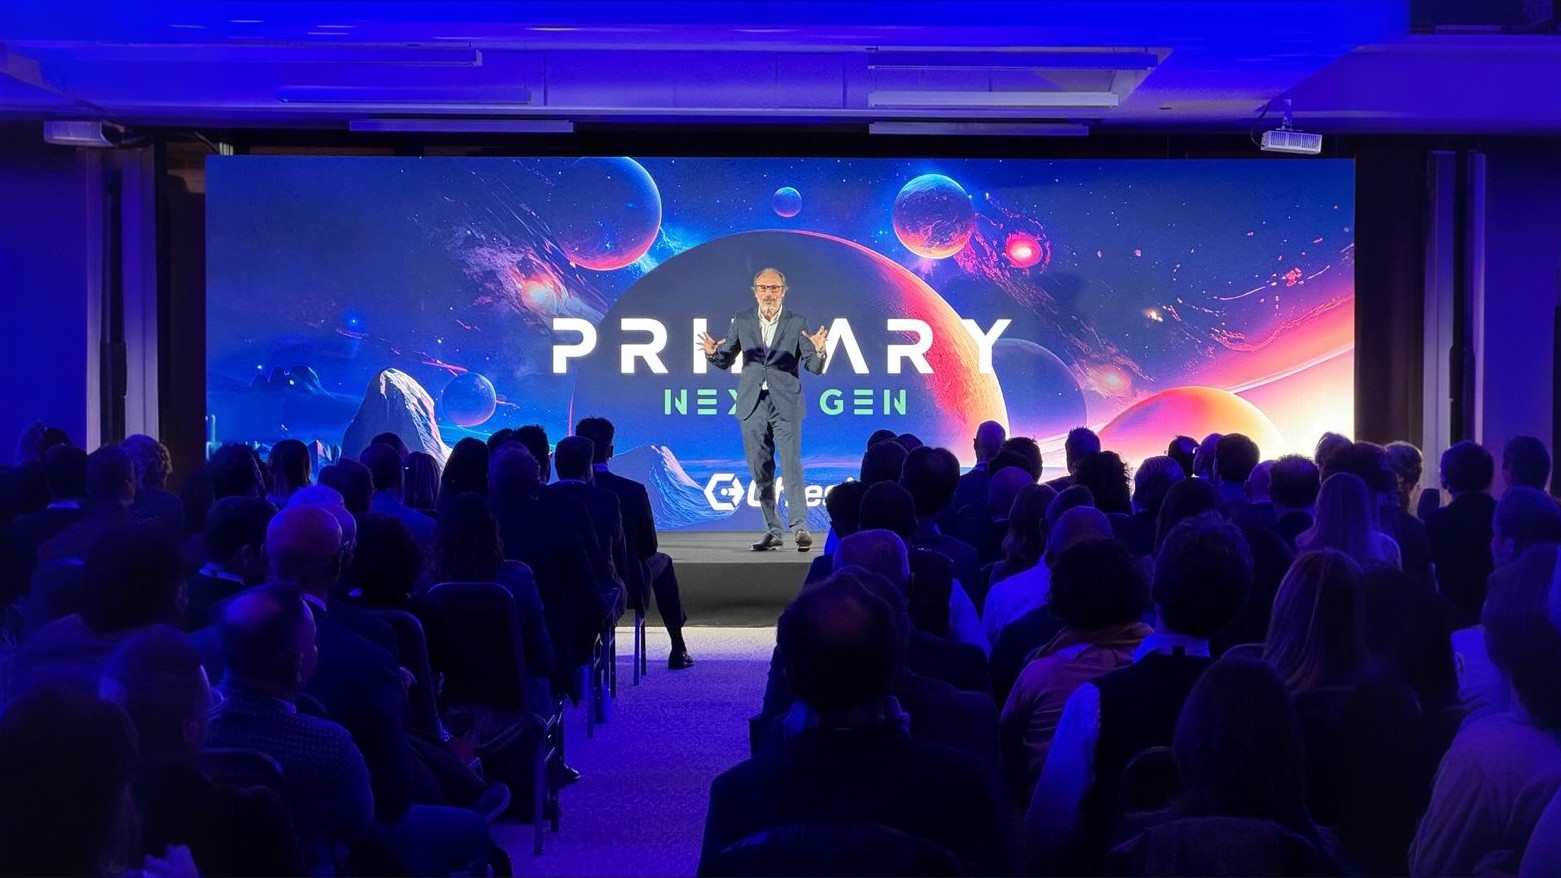 primary next gen chiesi farmaceutici evento corporate lighting design ledwall piazzato palco luci video dhs event solution